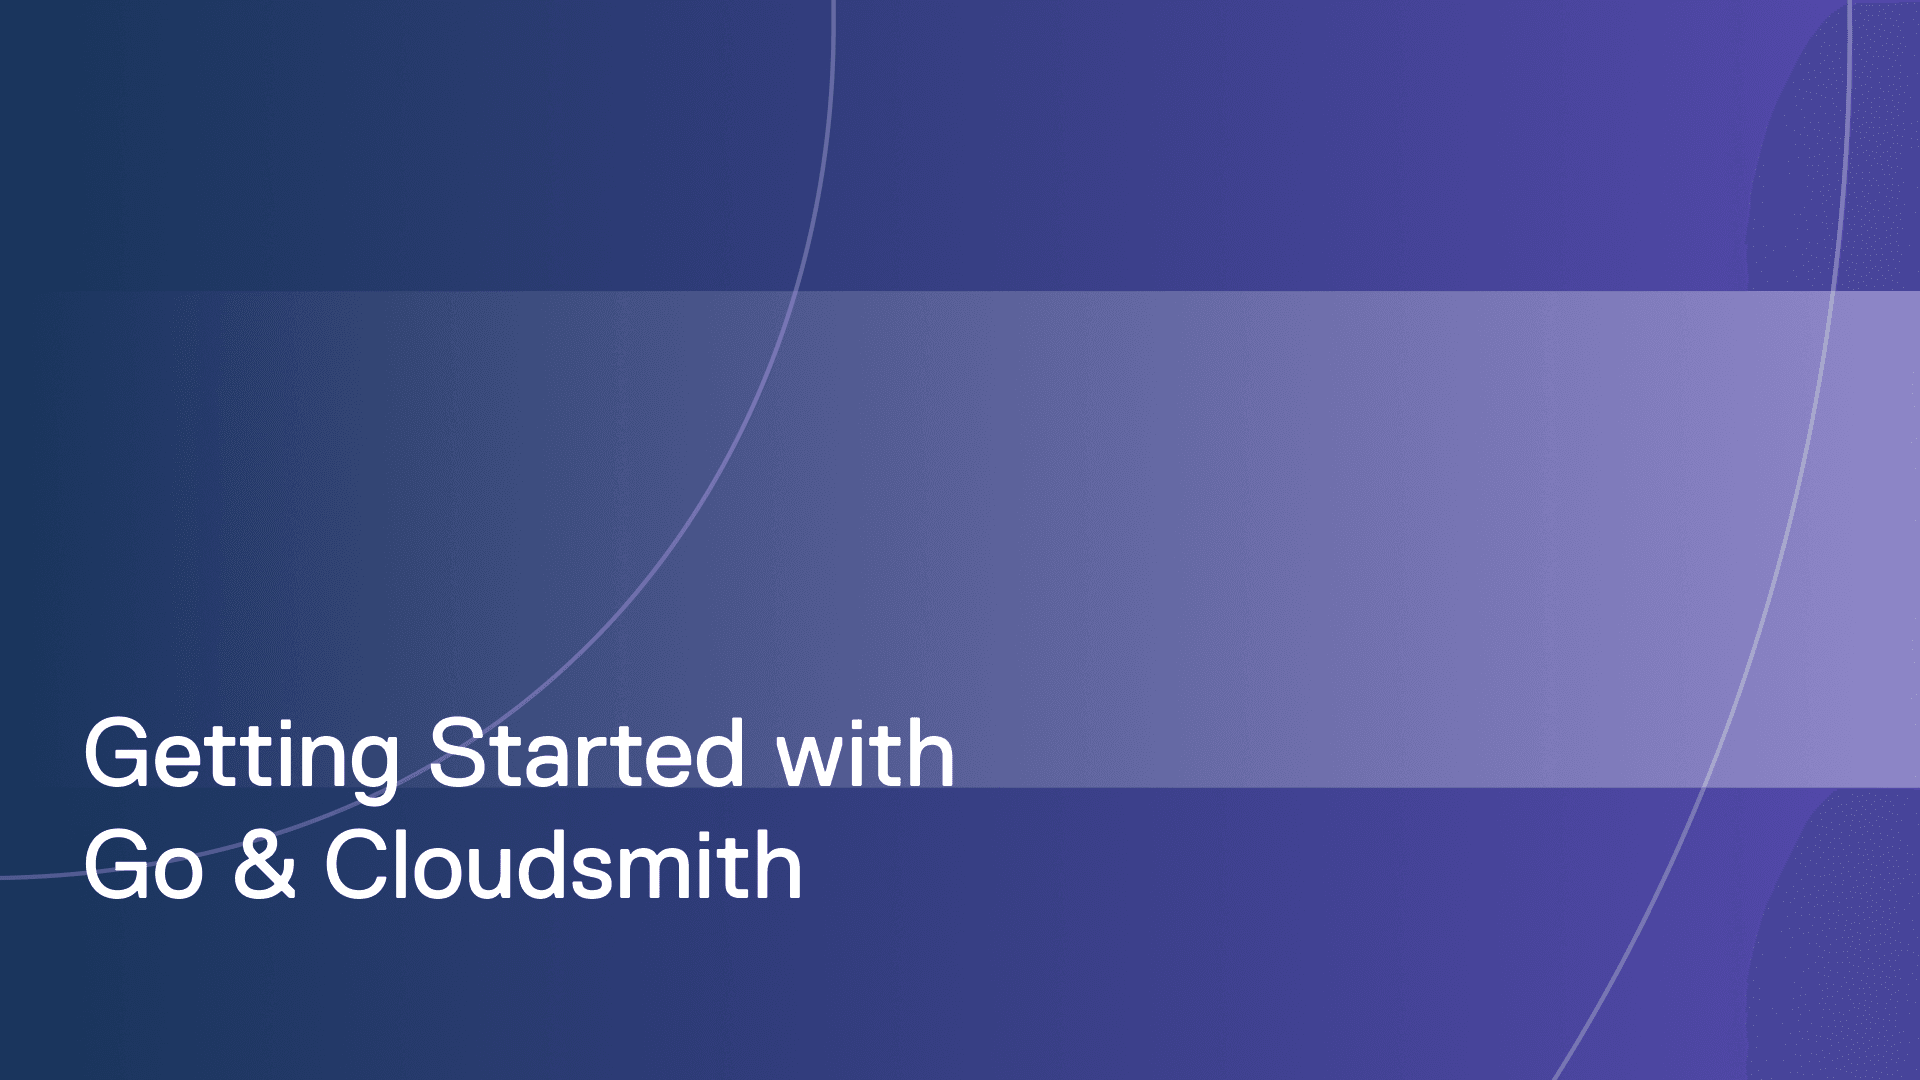 Getting started with Go and Cloudsmith